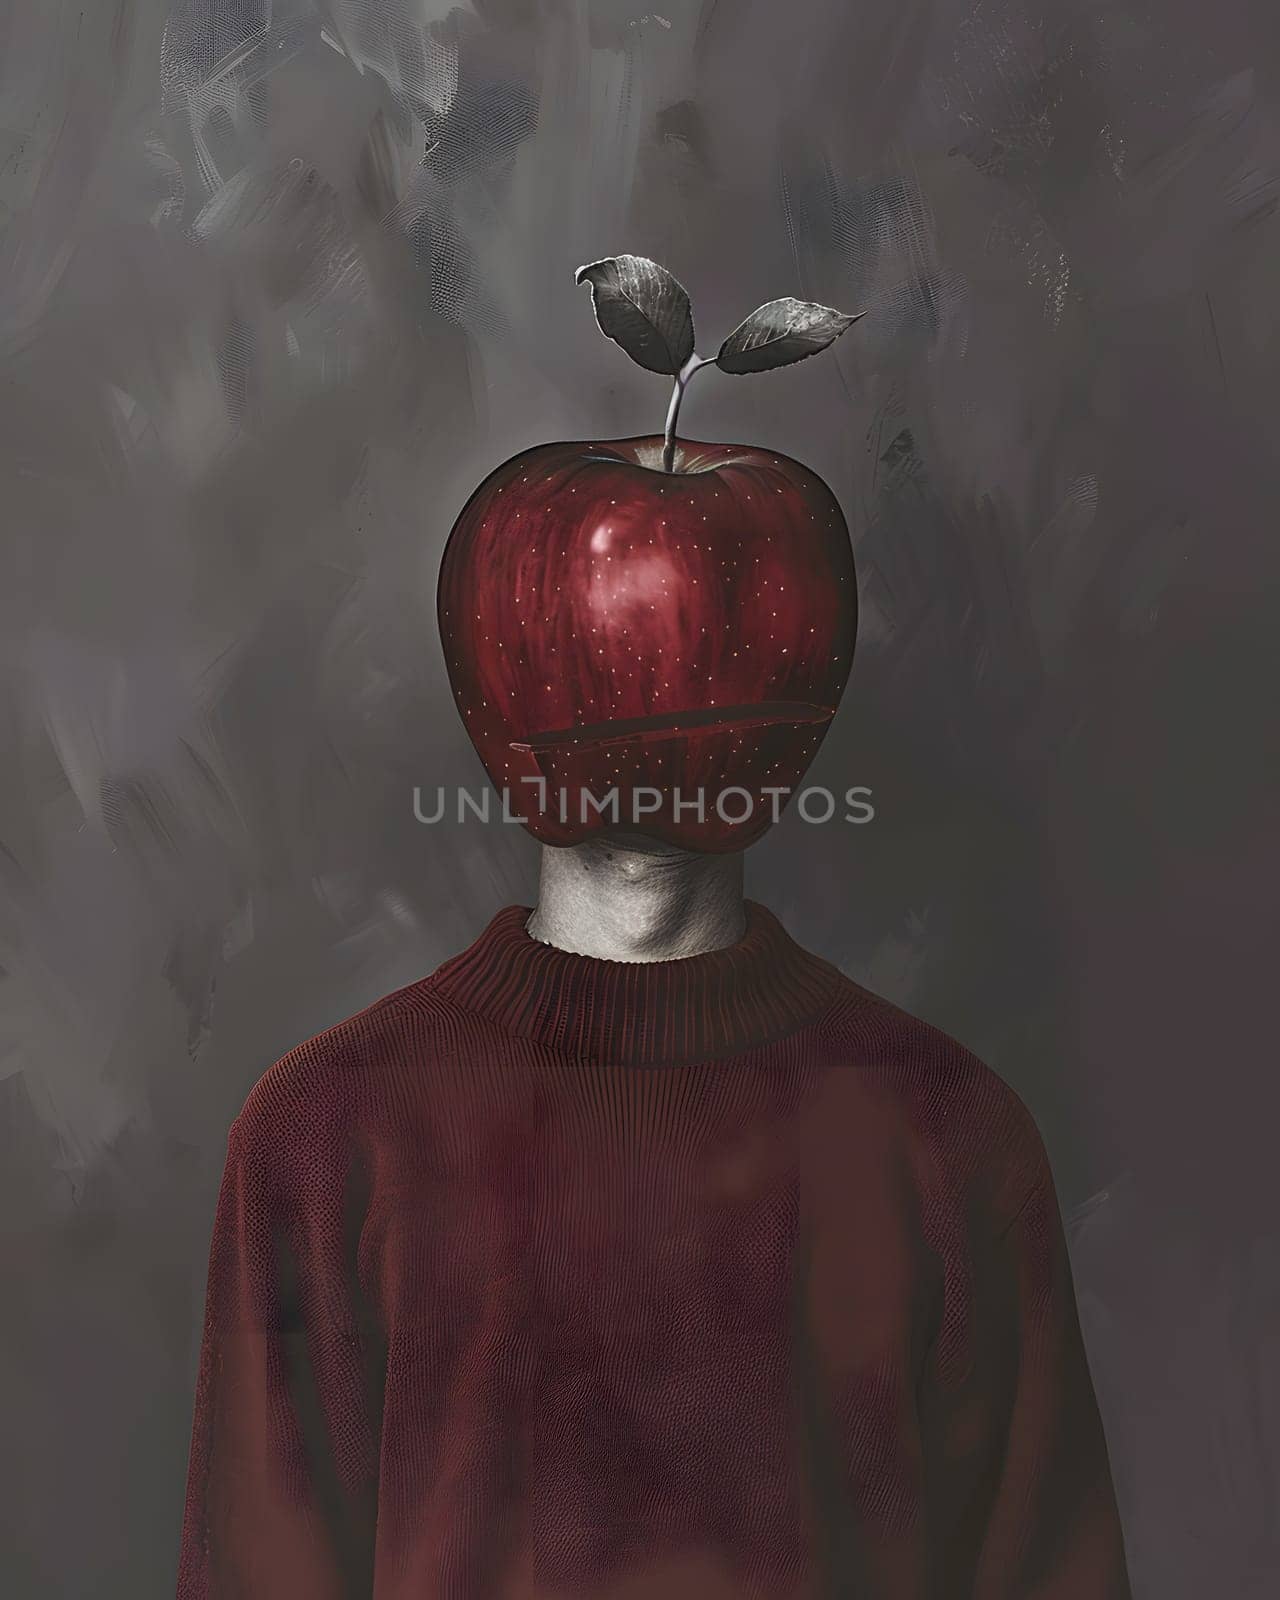 A man adorned with an apple head, a unique fusion of art and fashion accessory by Nadtochiy